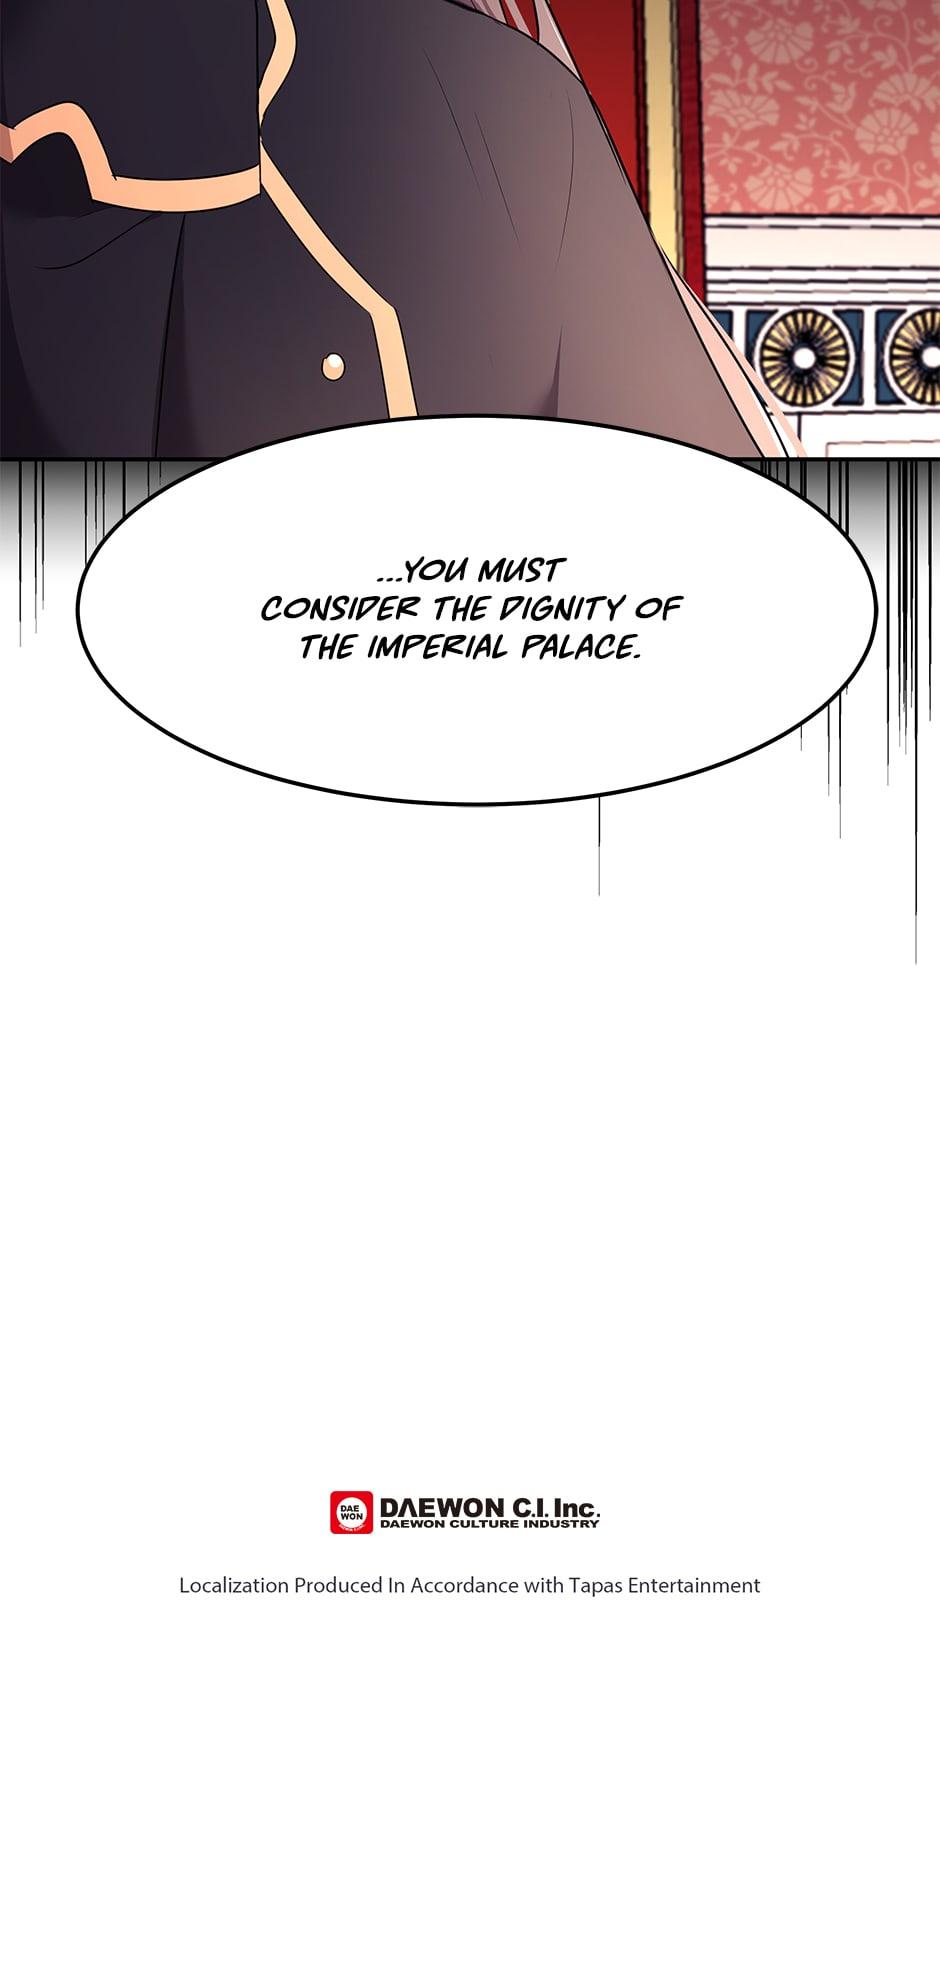 My Goodness, Your Majesty Chapter 63